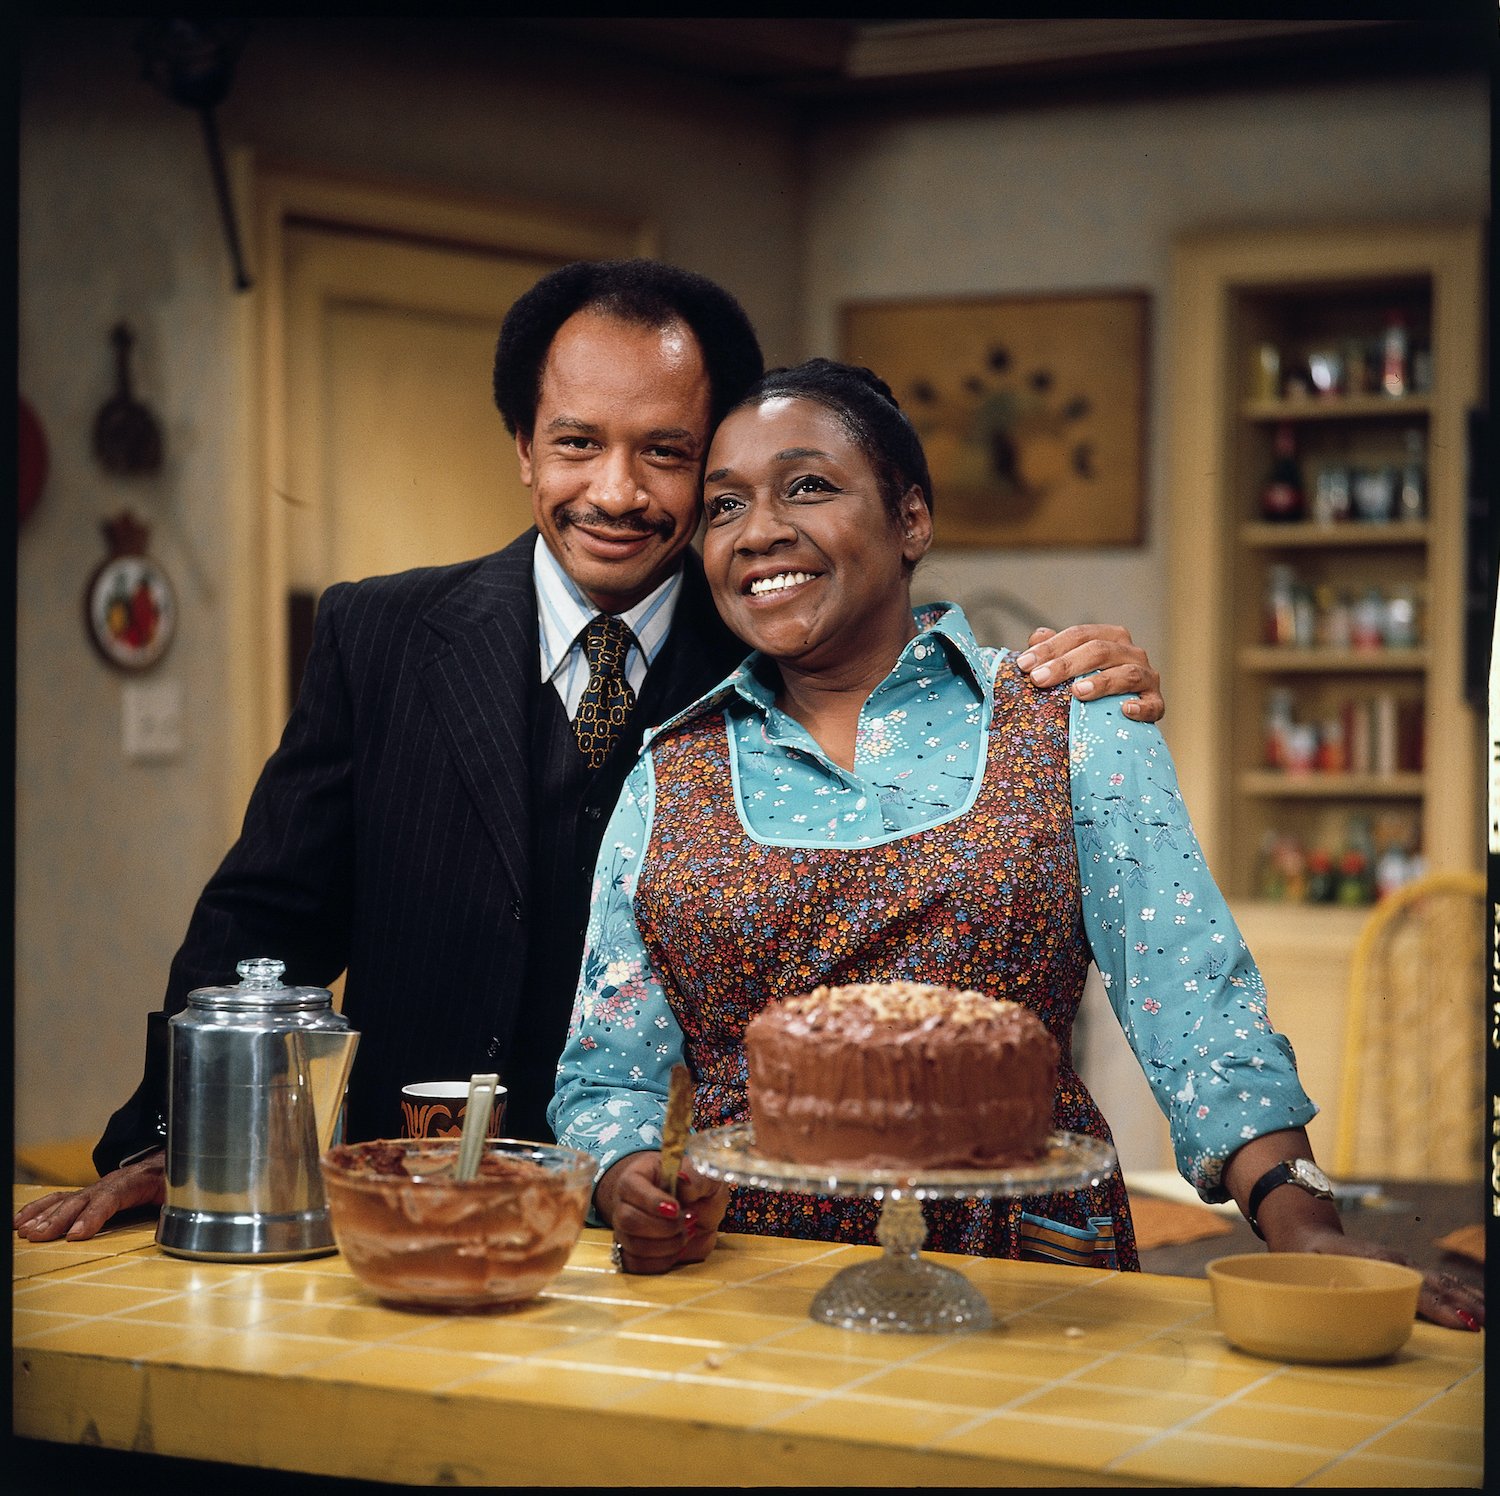 (L-R) Sherman Hemsley as George Jefferson and Isabel Sanford as Louise Jefferson, smiling